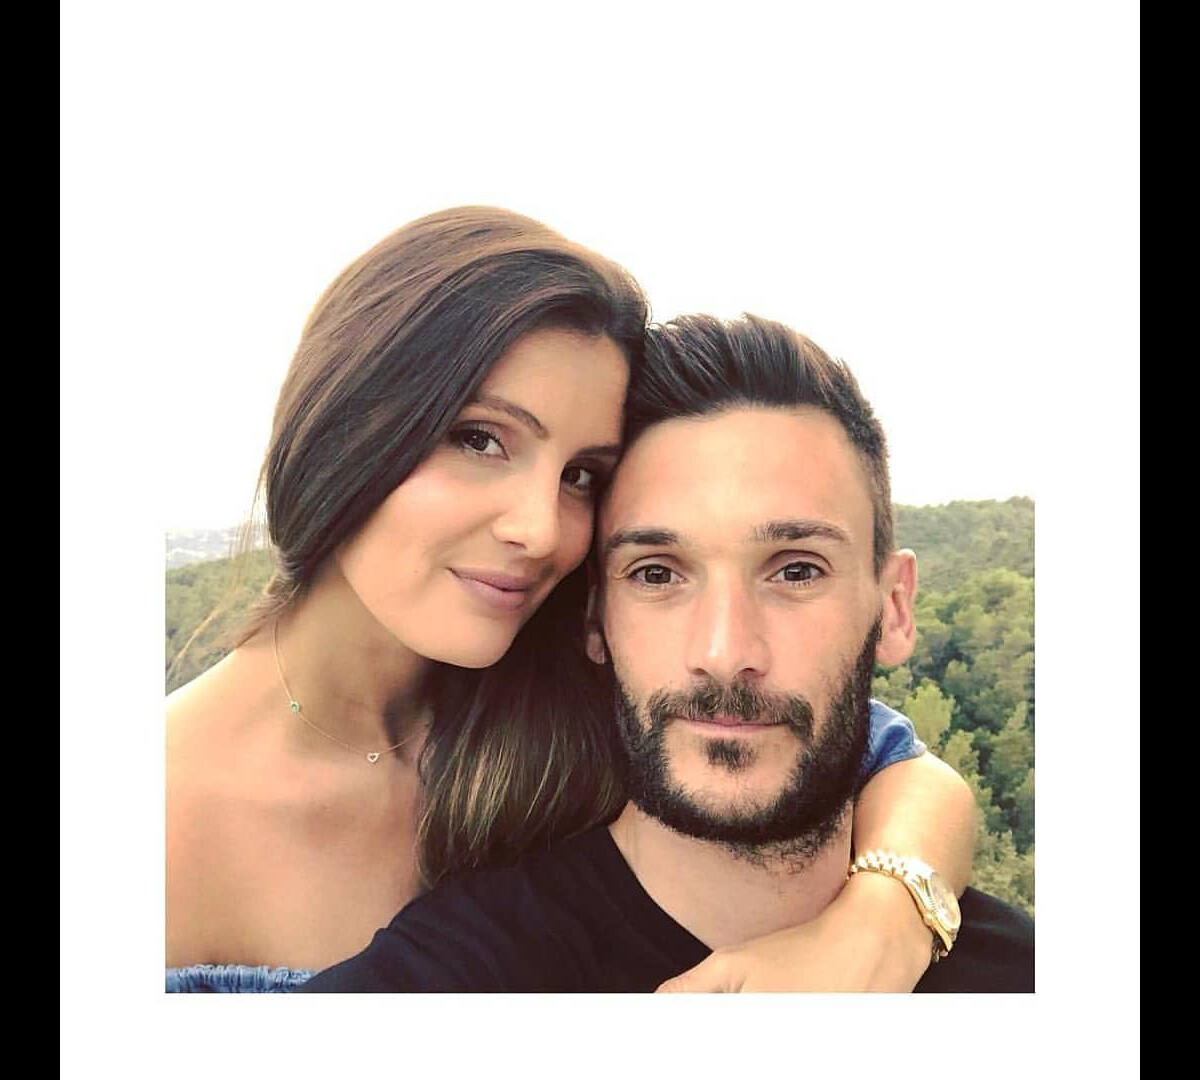 Who is Hugo Lloris wife Marine Lloris and how many children do